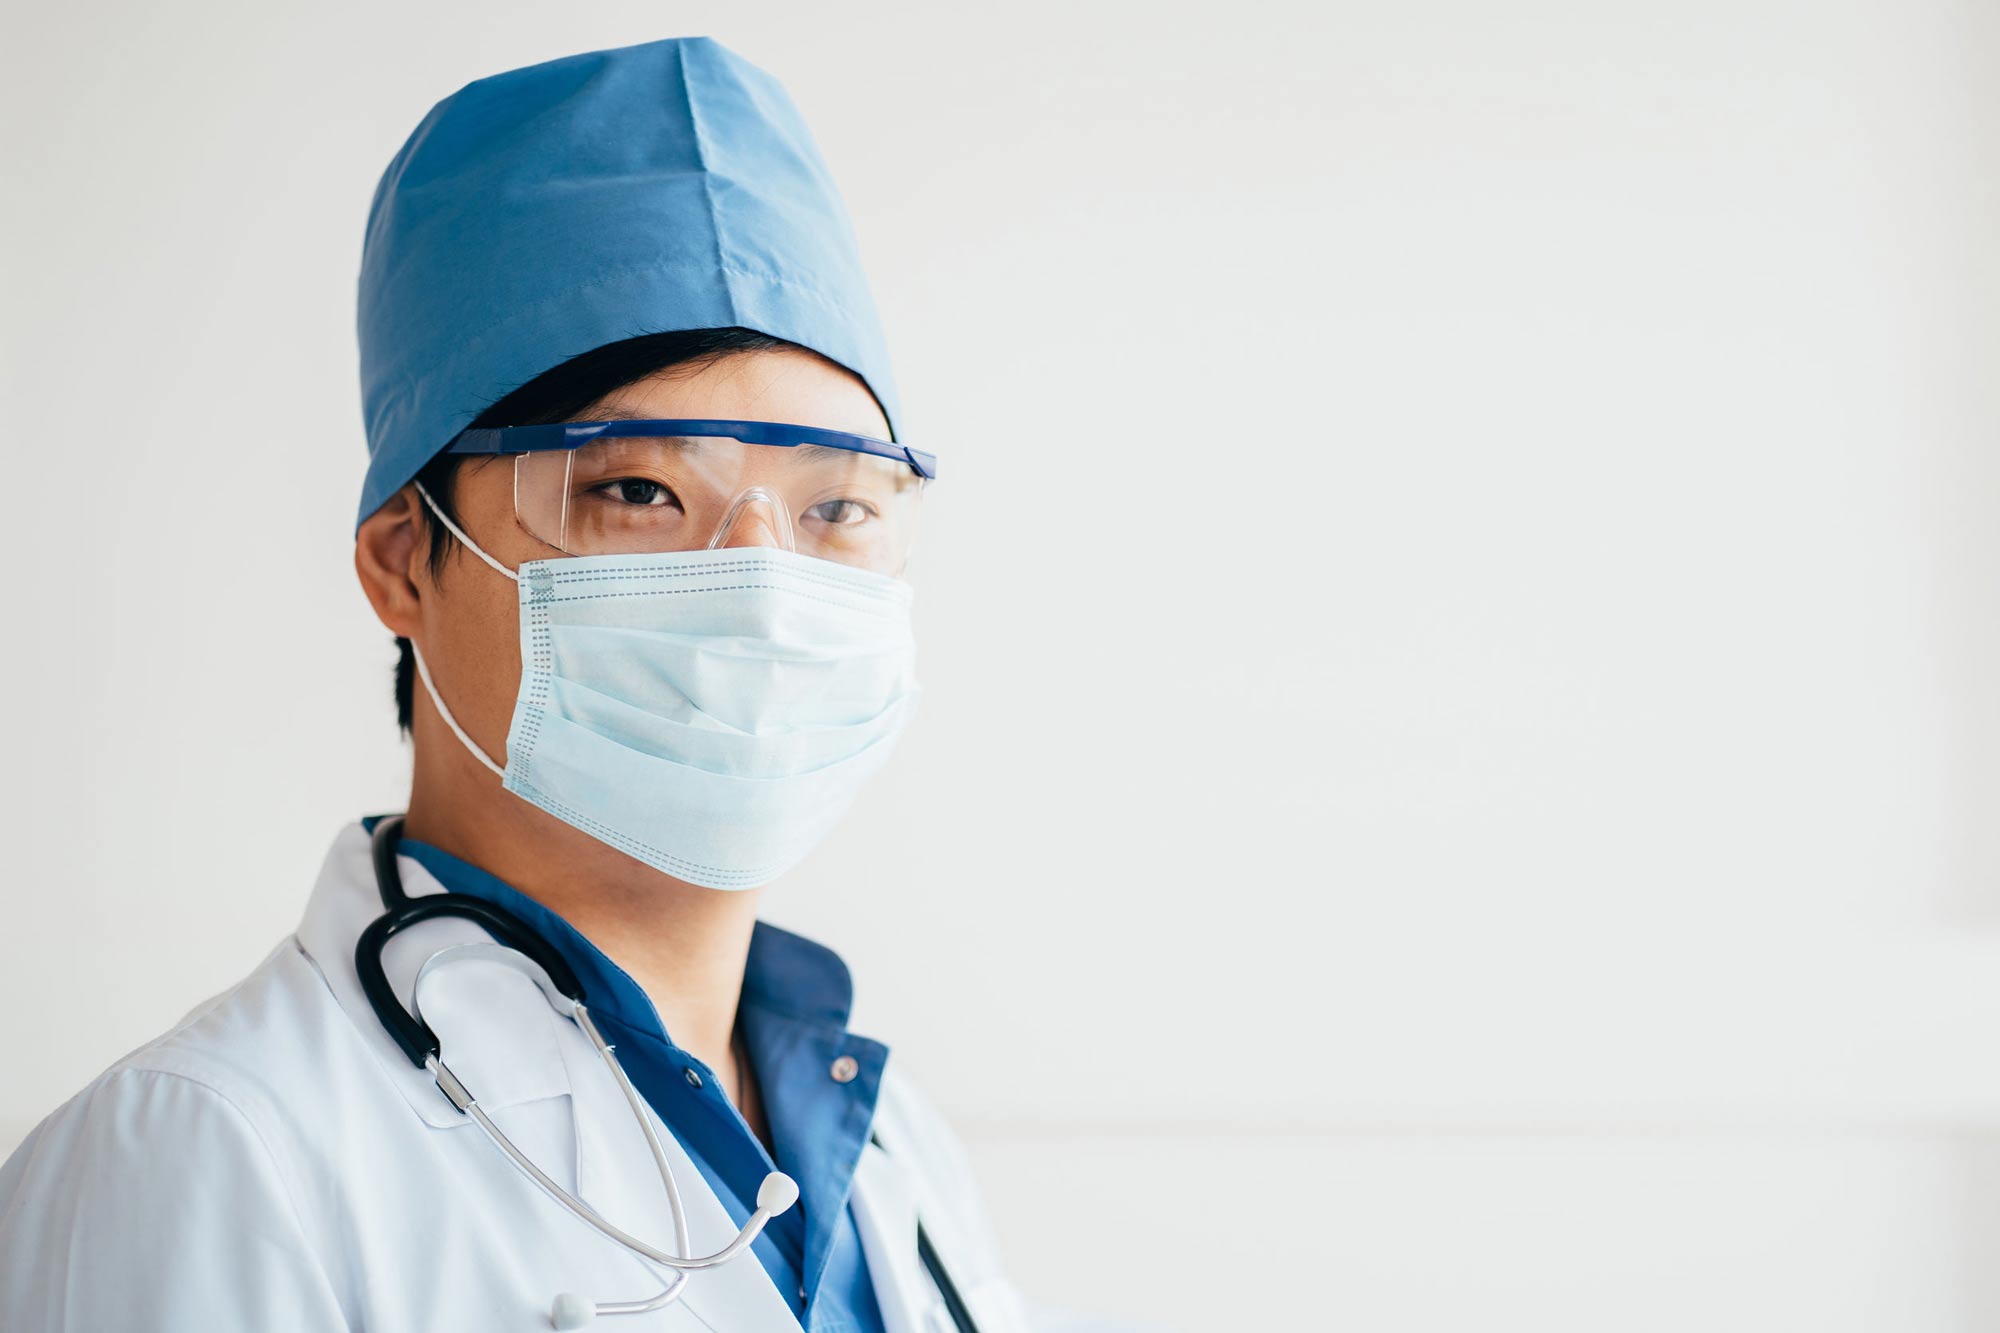 Doctor wearing PPE surgical mask and uniform